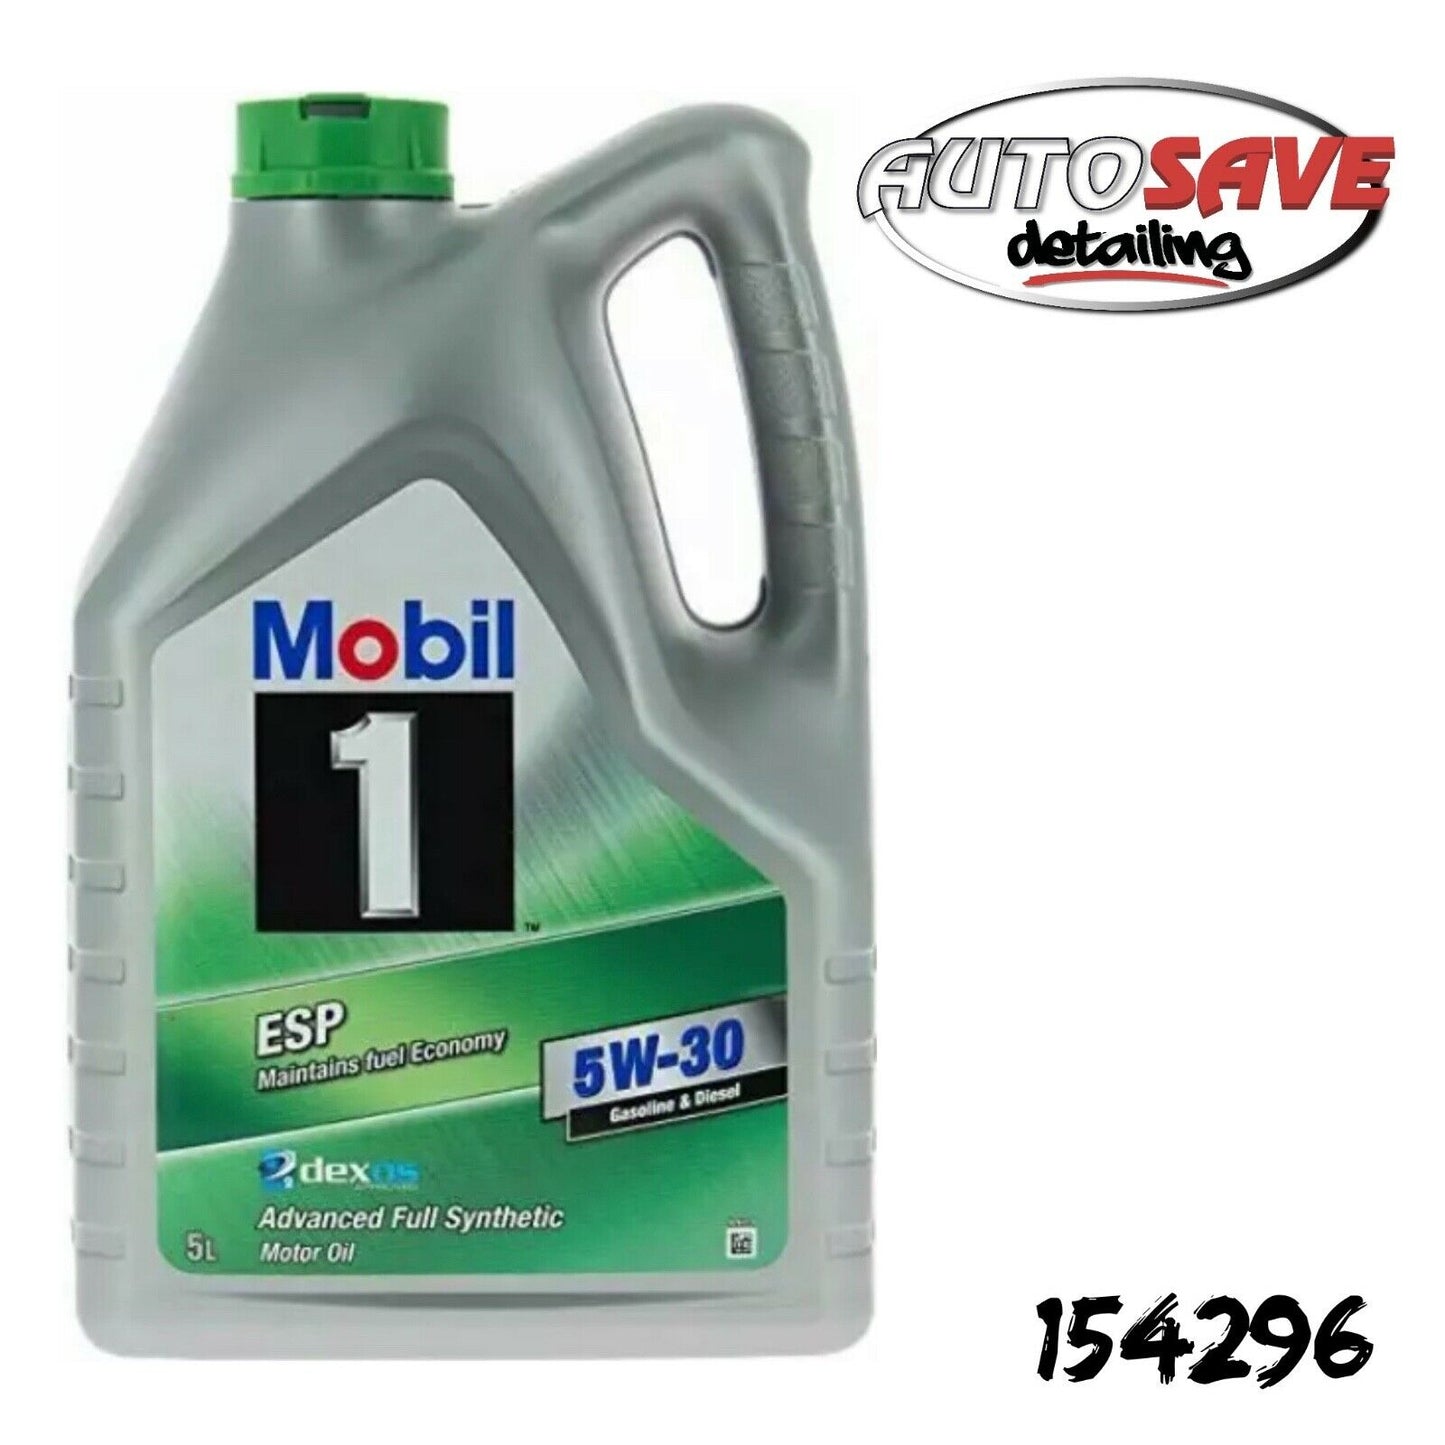 Mobil 1 ESP 5W-30 Fully Synthetic Engine Oil